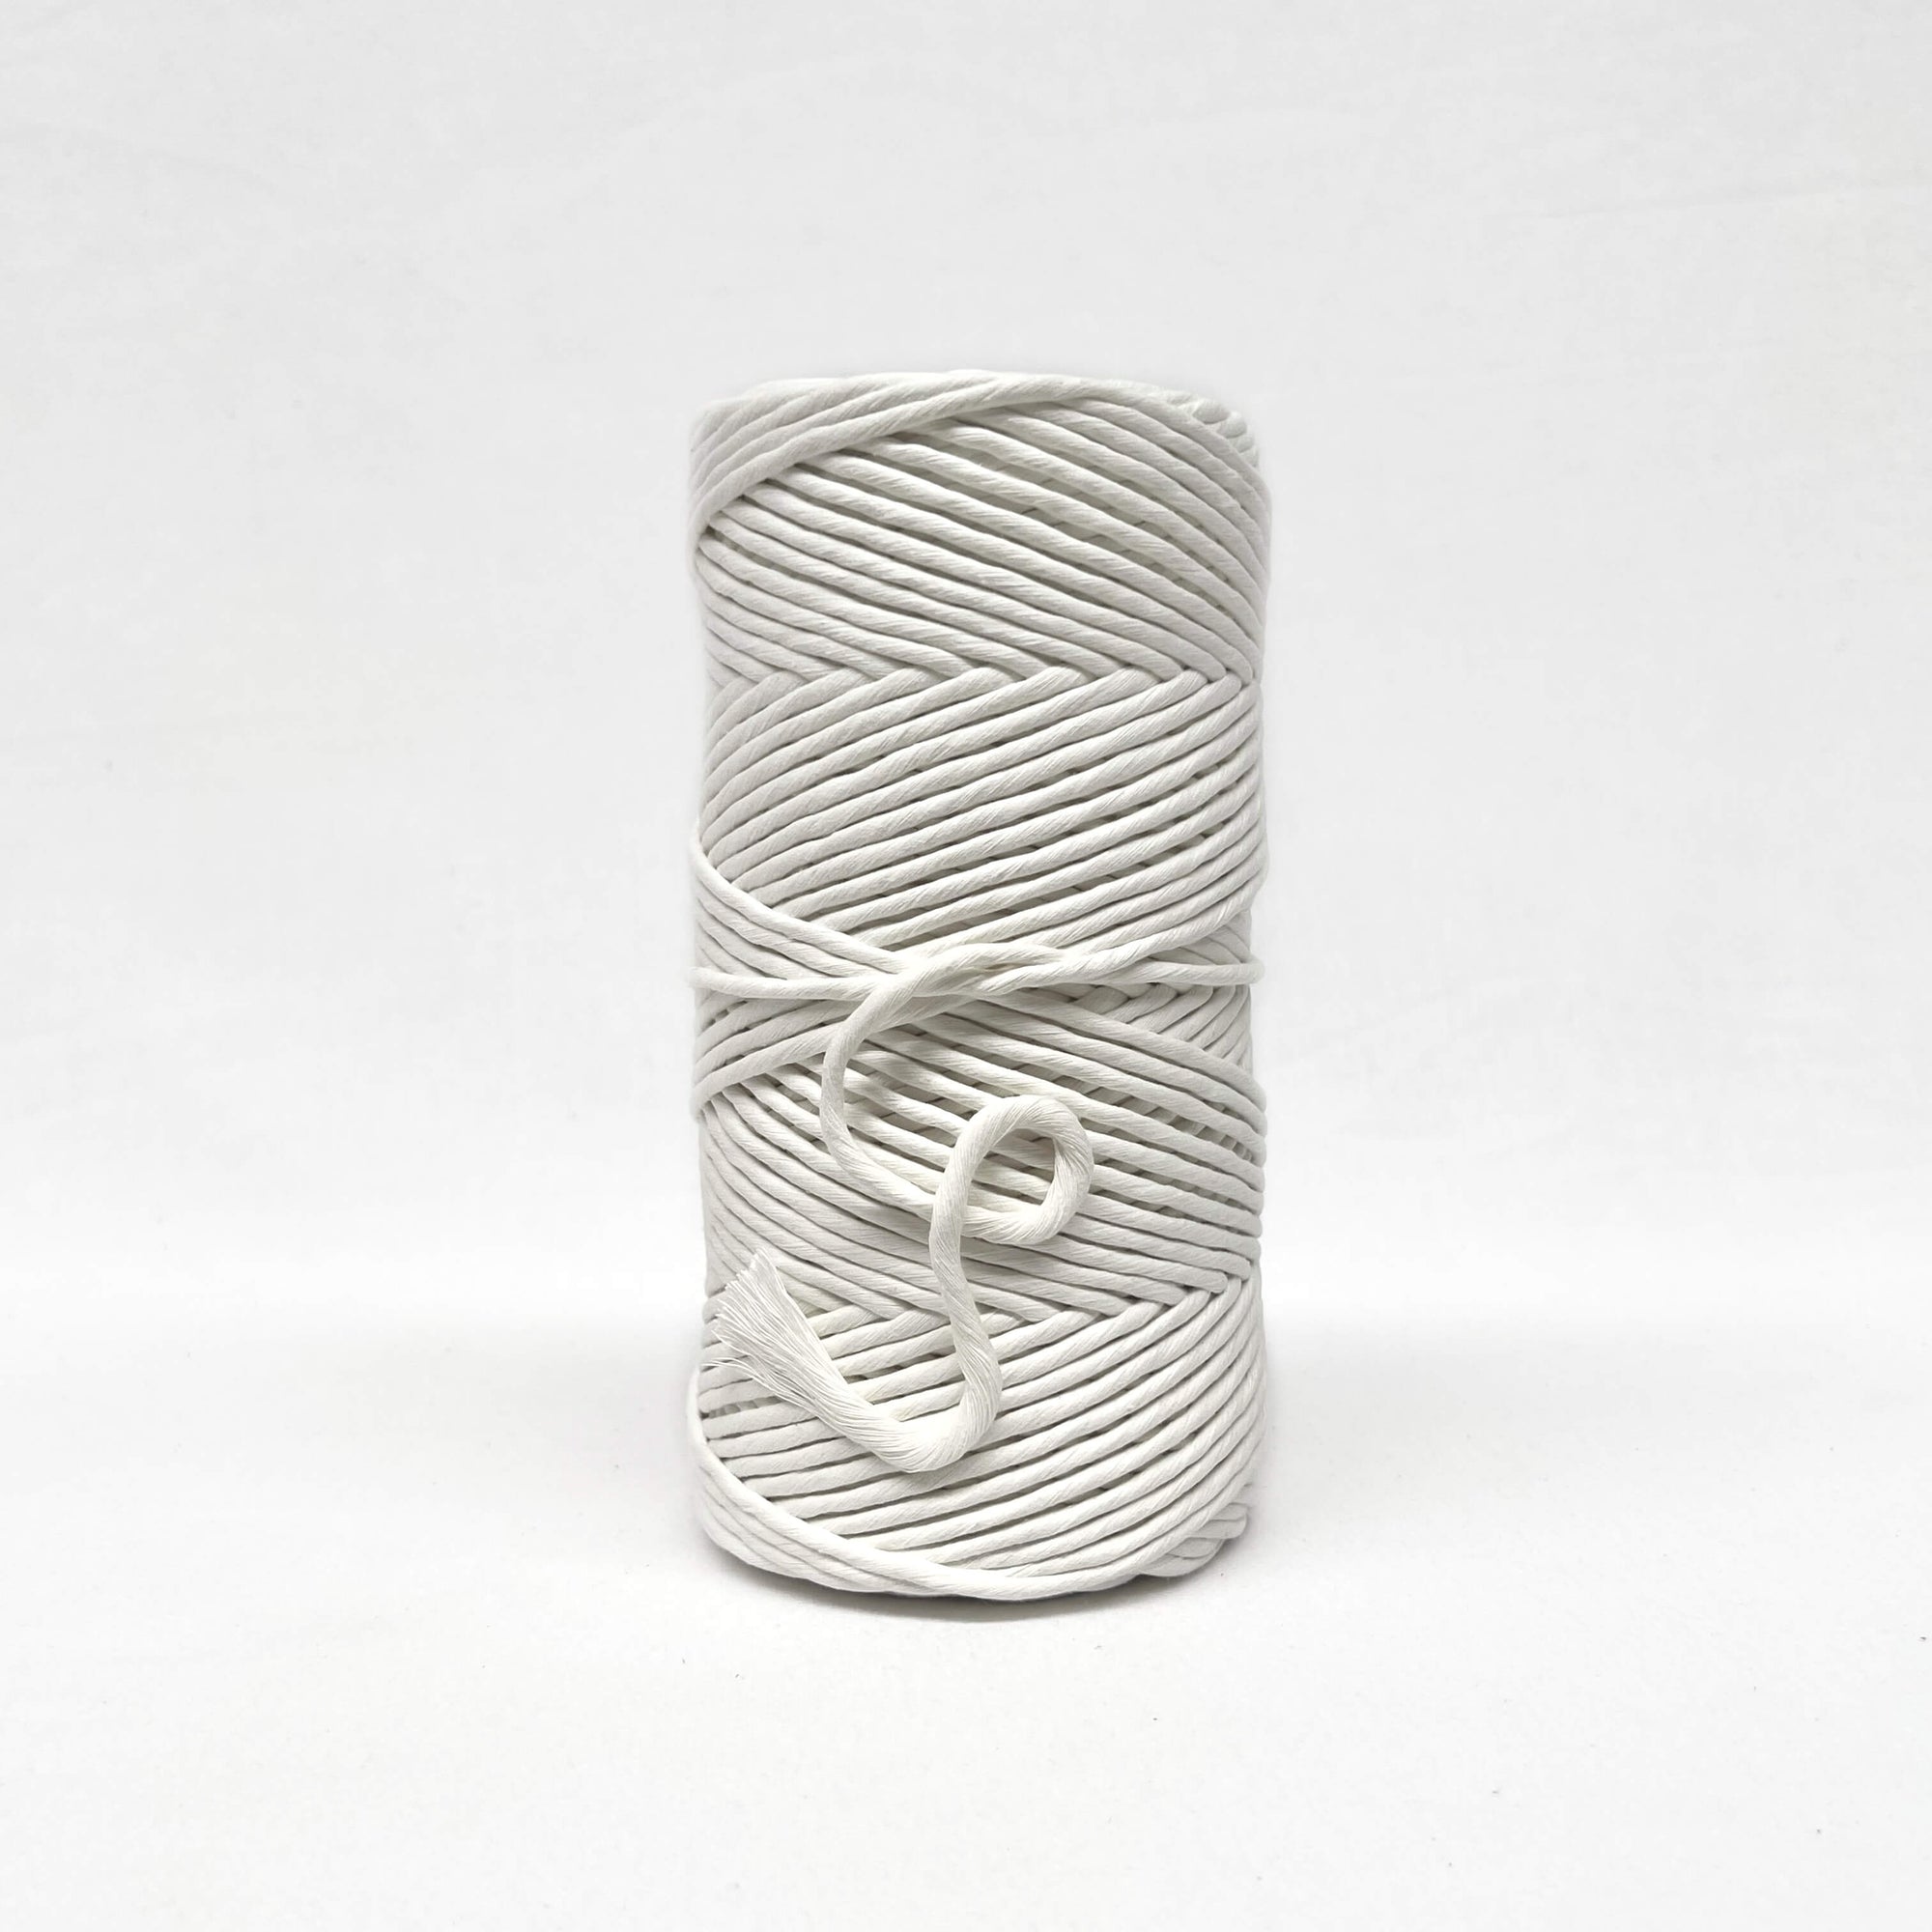 5mm cotton string in snow white for macrame on white background 